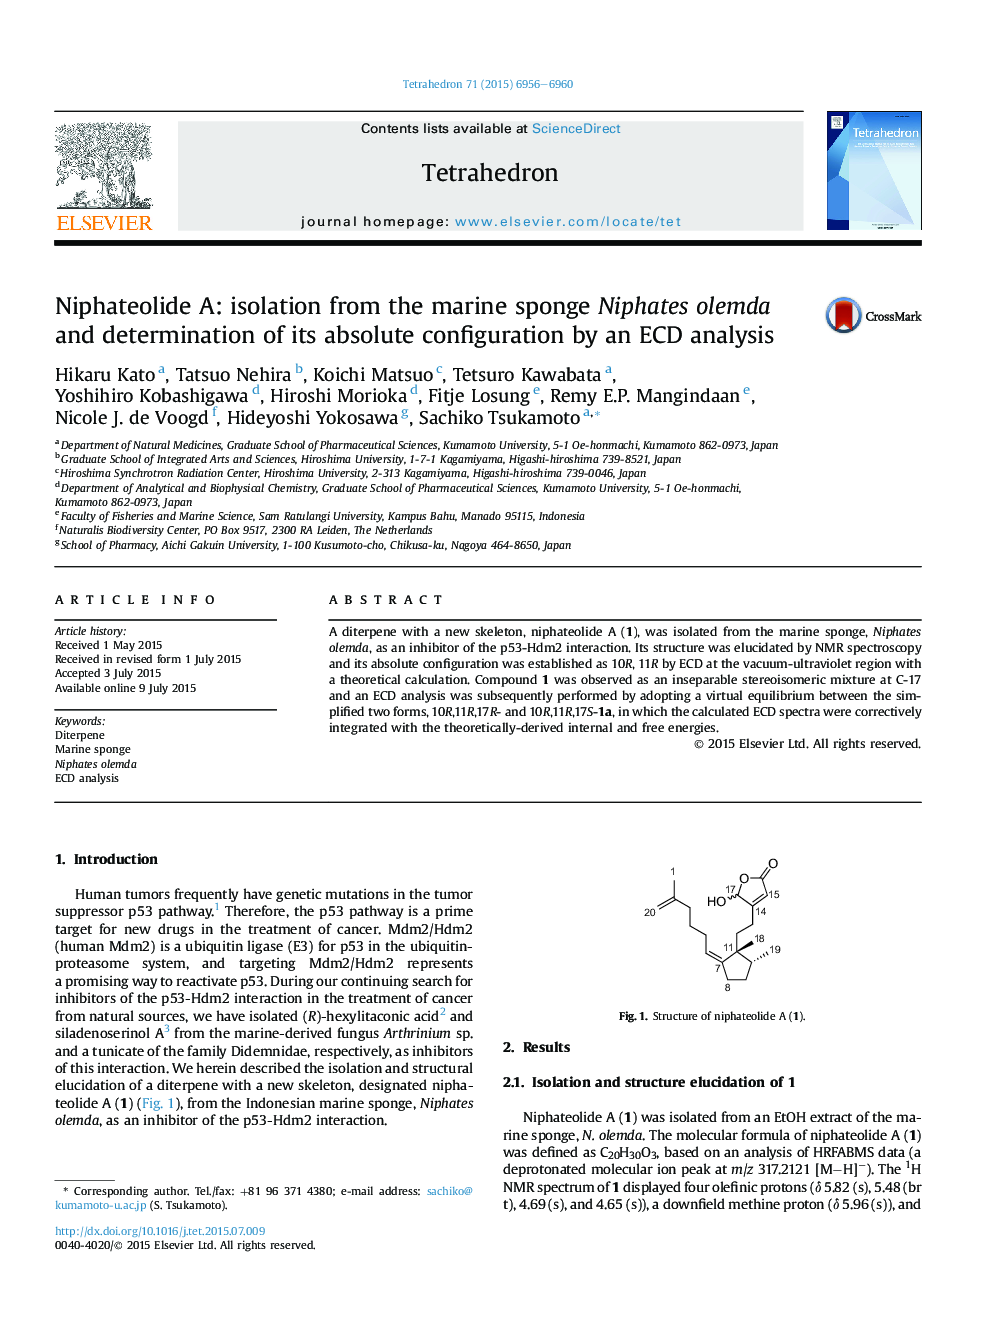 Niphateolide A: isolation from the marine sponge Niphates olemda and determination of its absolute configuration by an ECD analysis